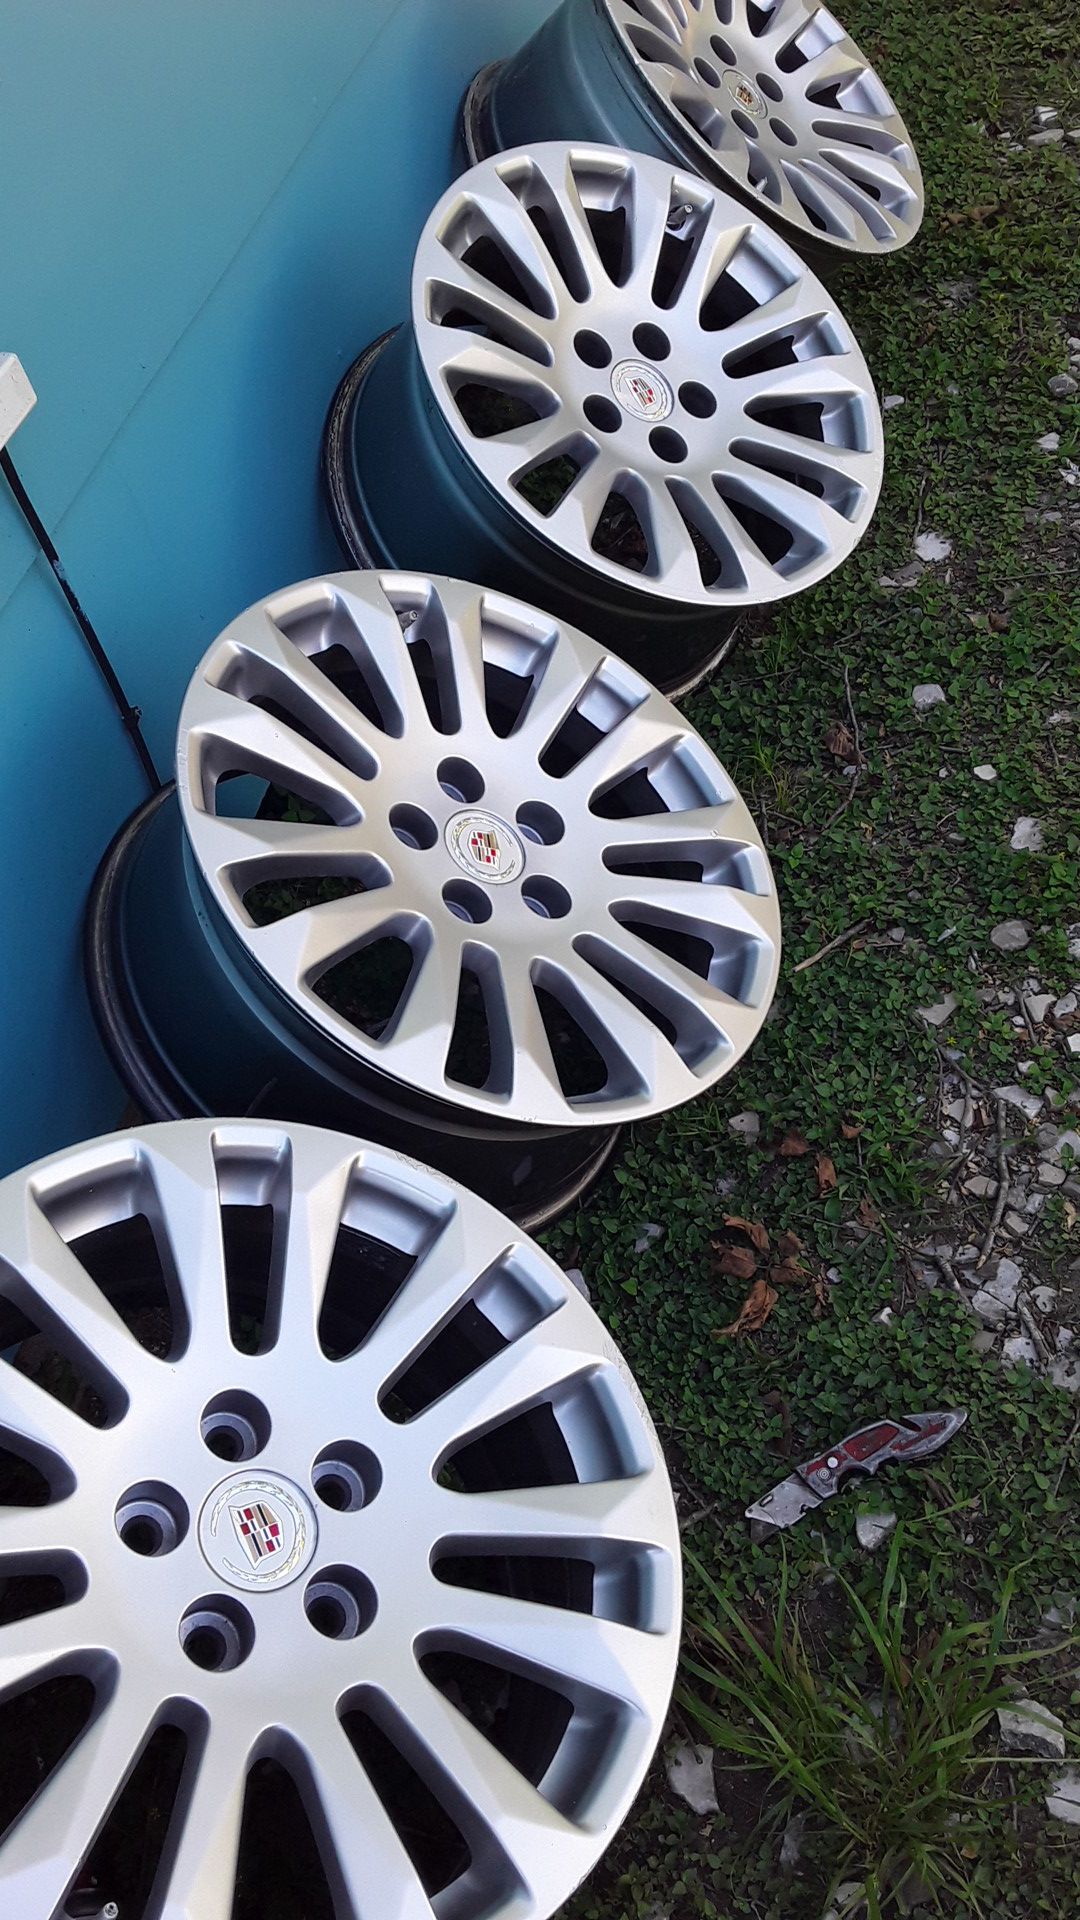 Cadillac rims size 17inches just rims no tires I'm asking 160 obo thanks for your time